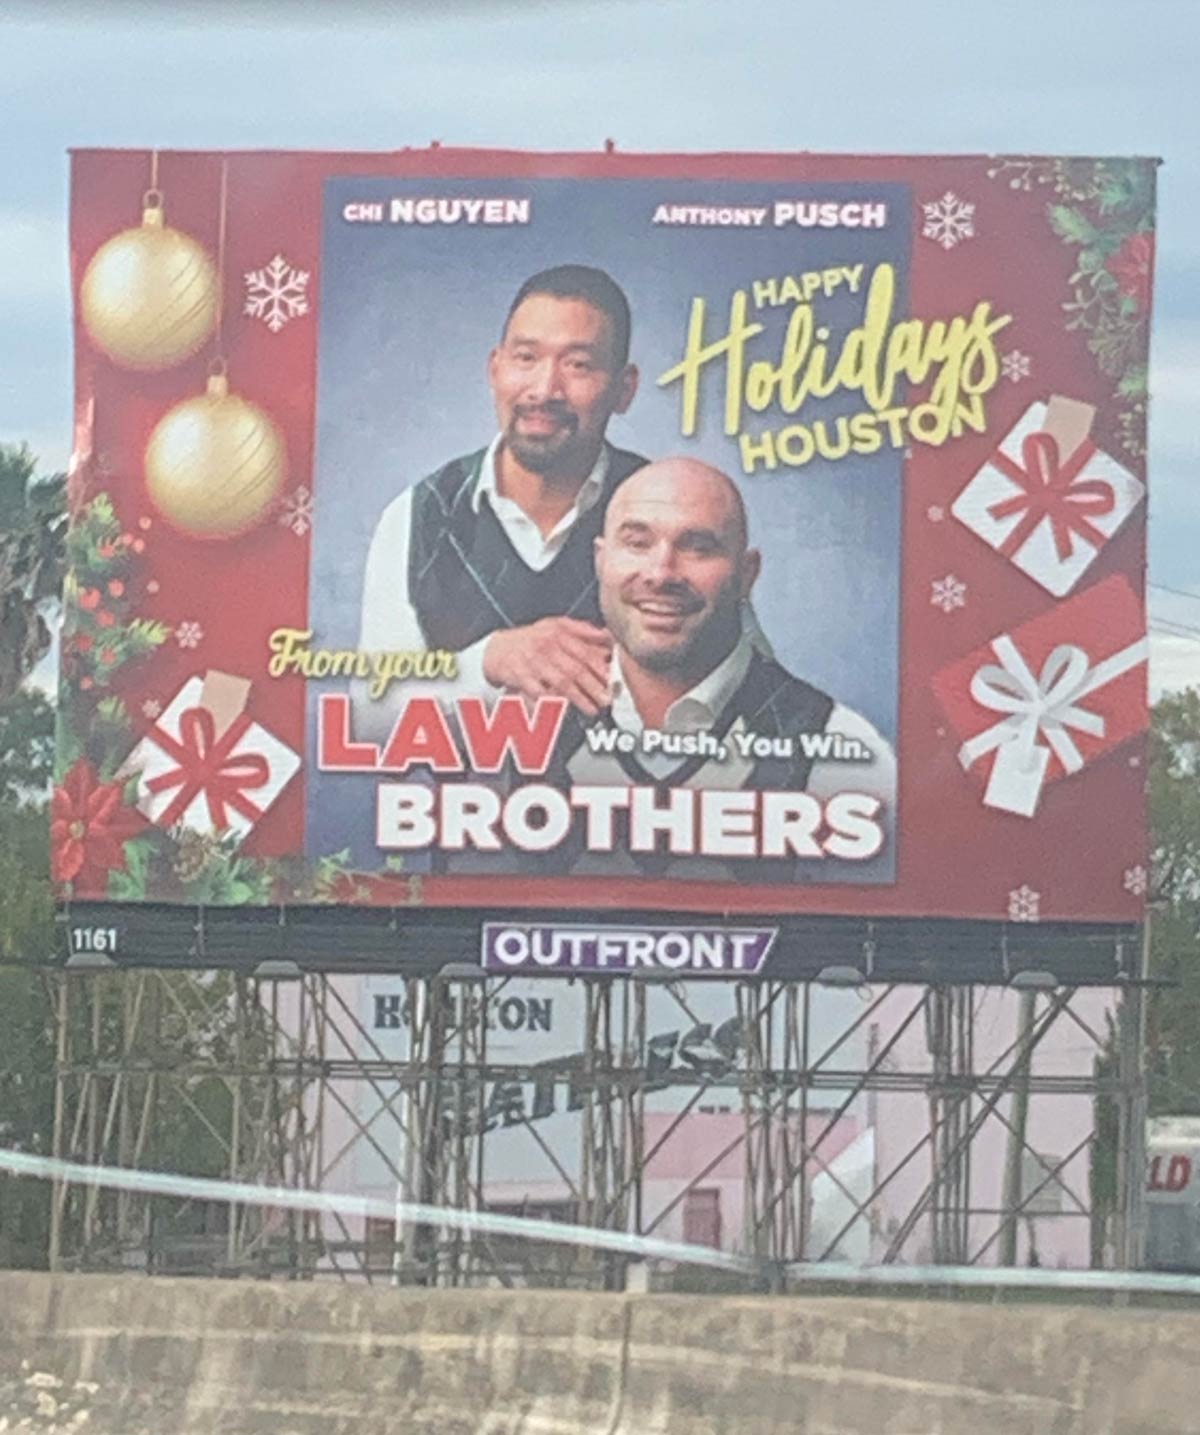 An actual ad in my city